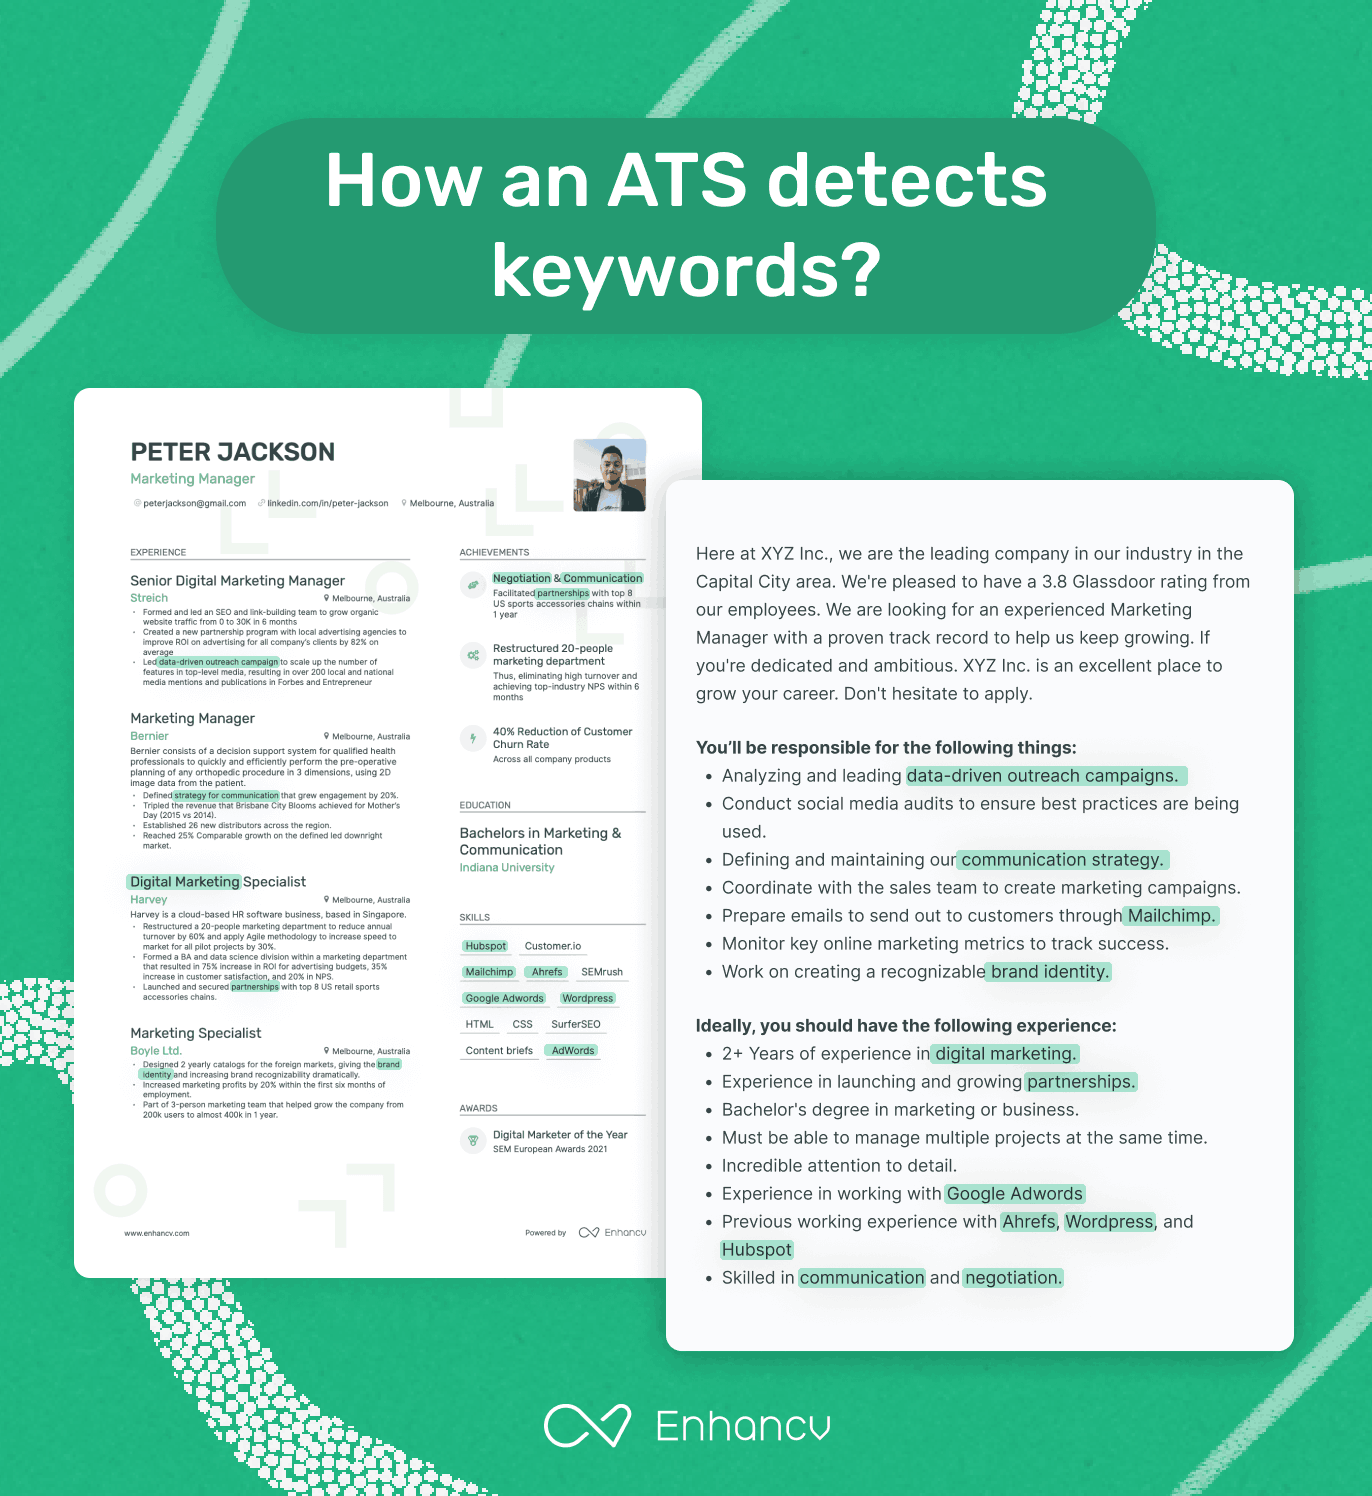 how-ats-detects-resume-keywords-2.png